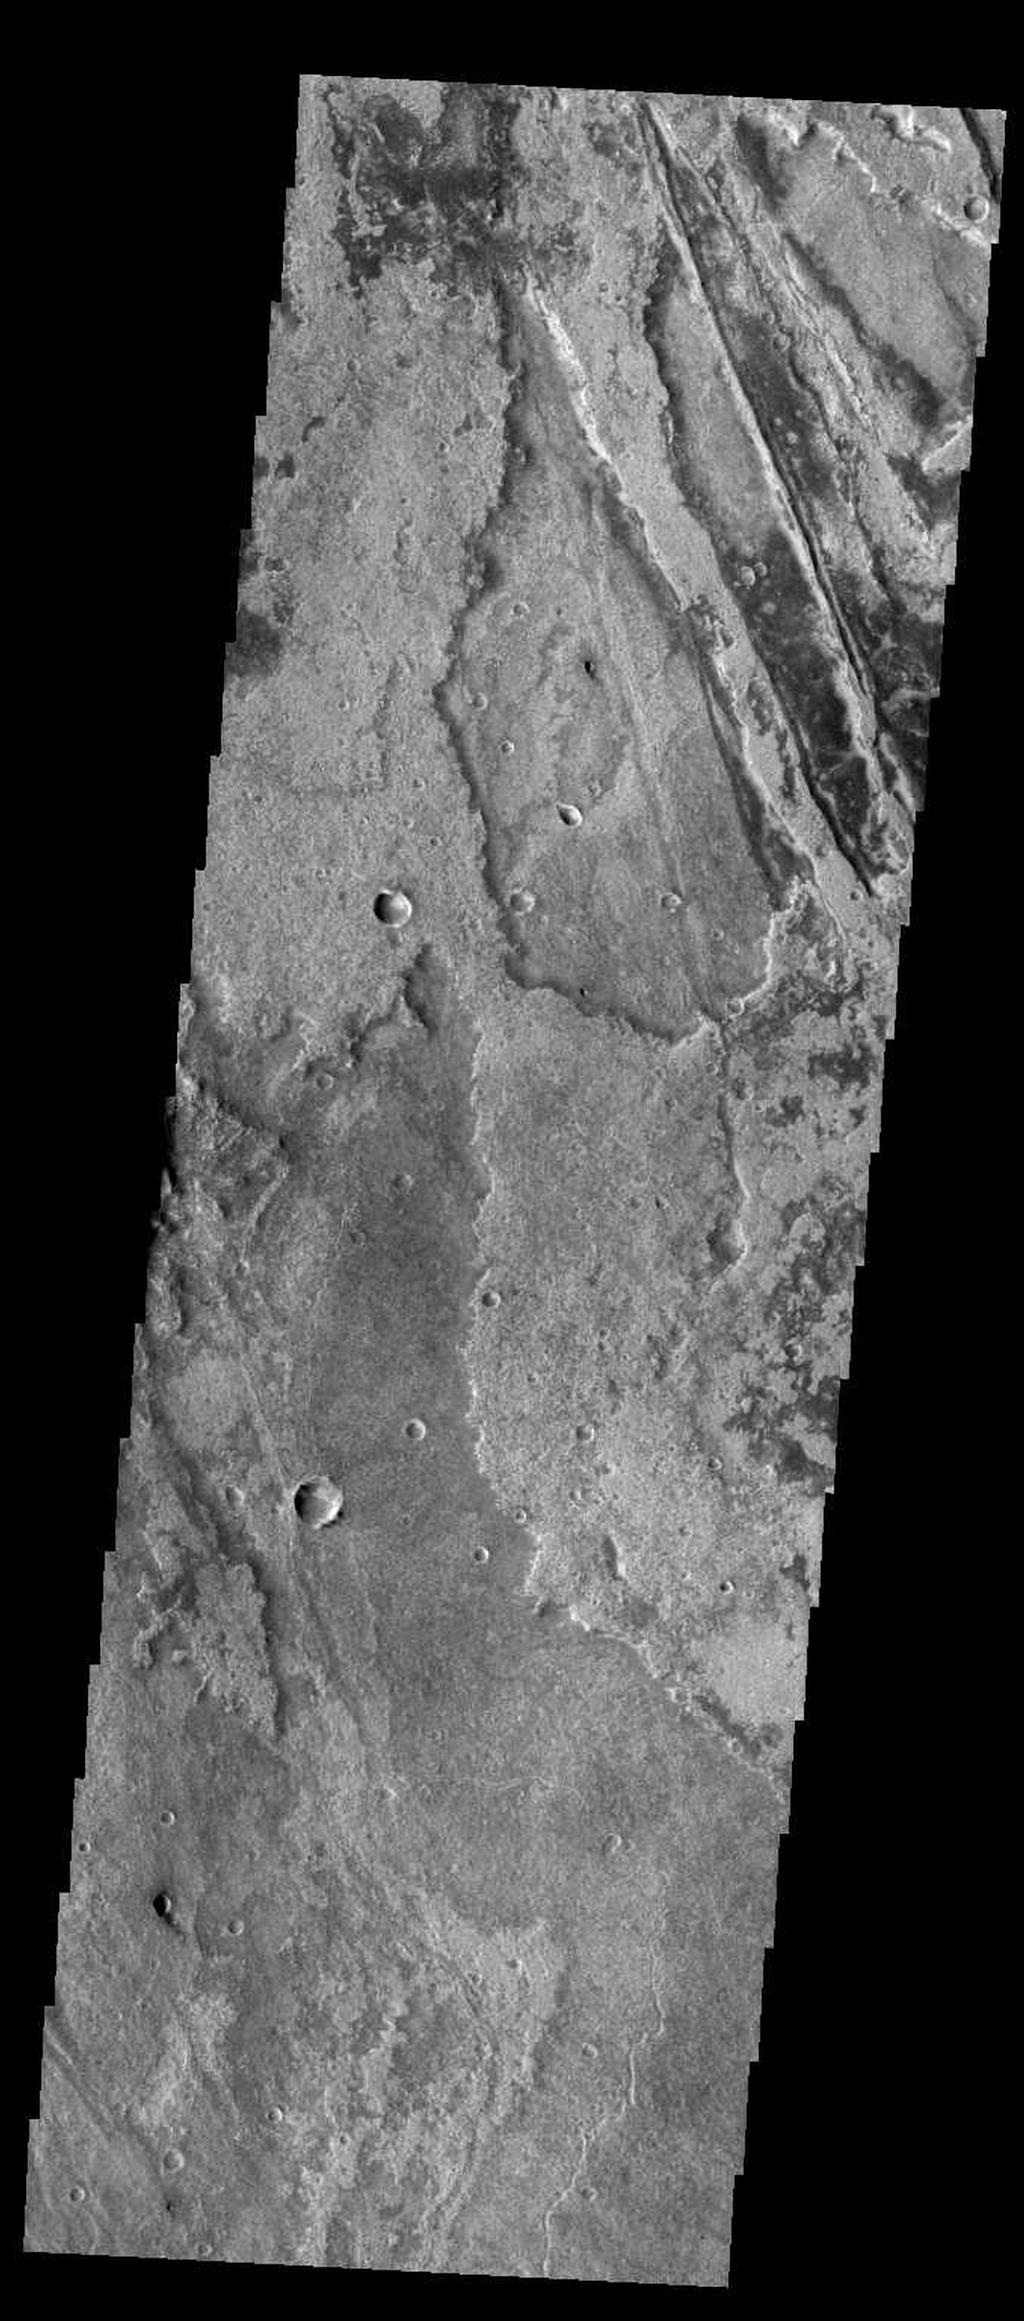 Just as on Earth, volcanism and tectonism are found together on Mars. Here is an example: the ridges and fractures of Claritas Fossae are affecting or perhaps hosting the volcanic flows of Solis Planum.